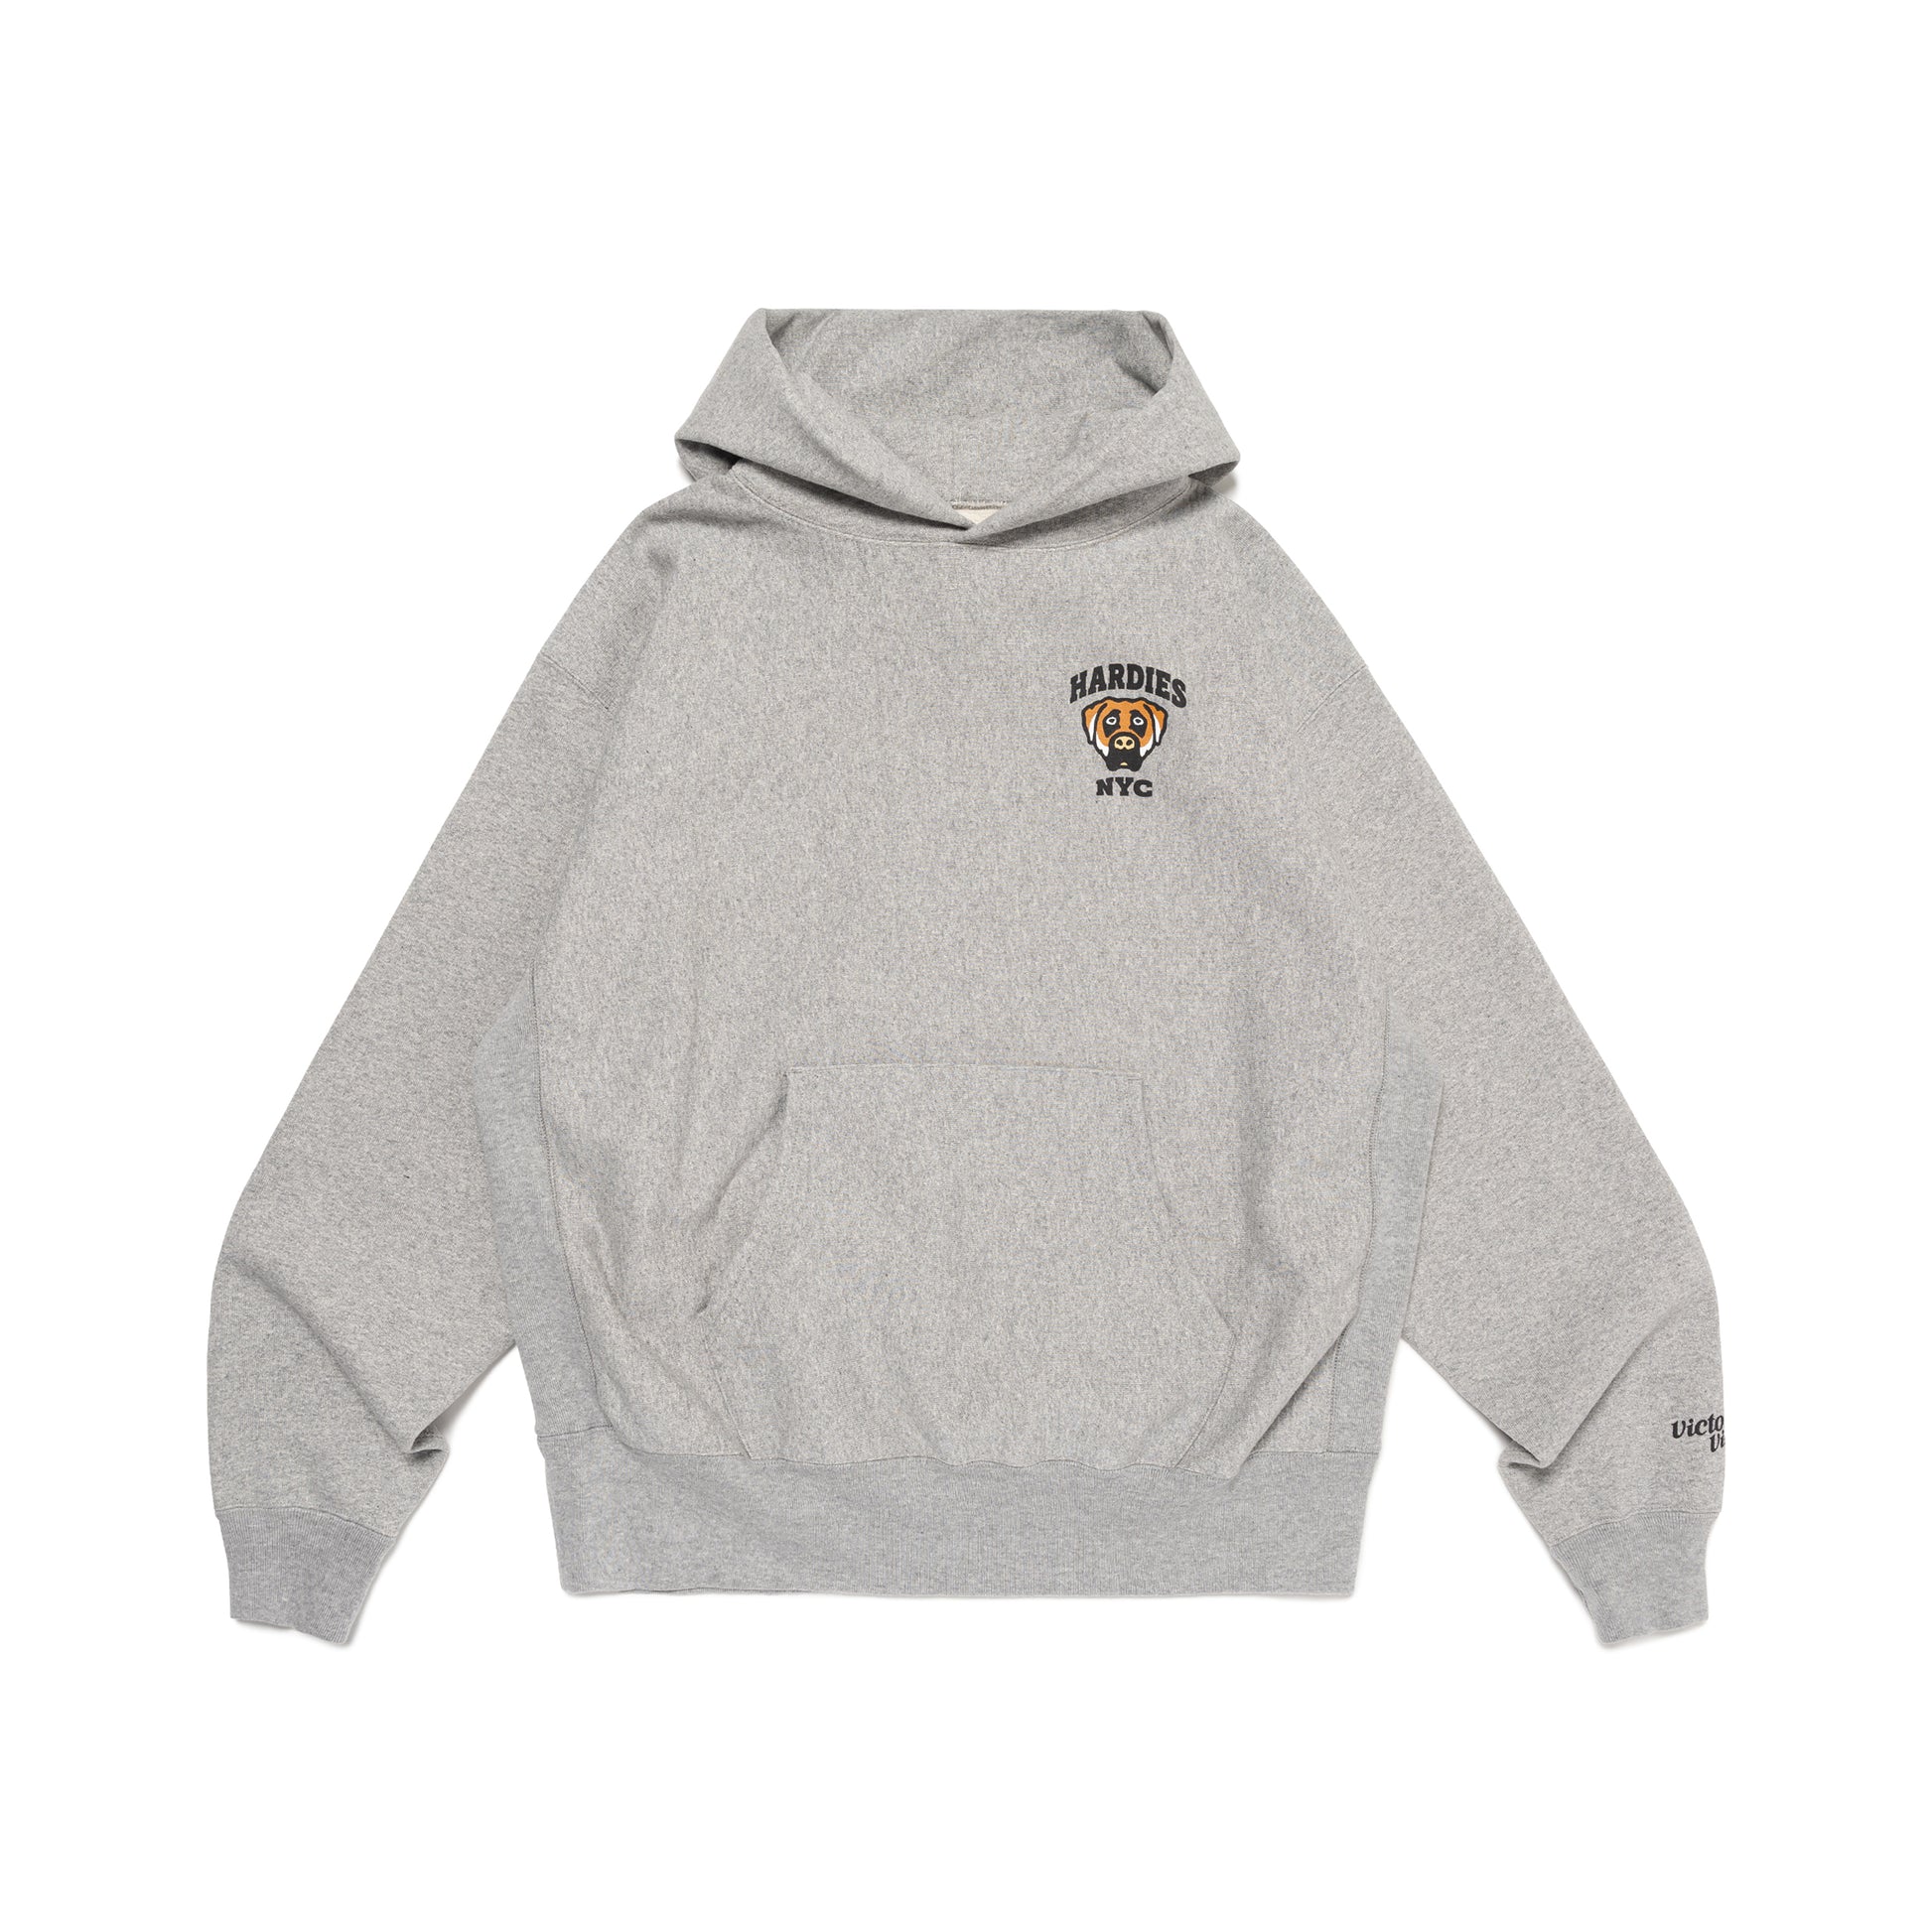 VICTOR VICTOR × HARDIES HEAVY WEIGHT HOODIE #2 GY-A